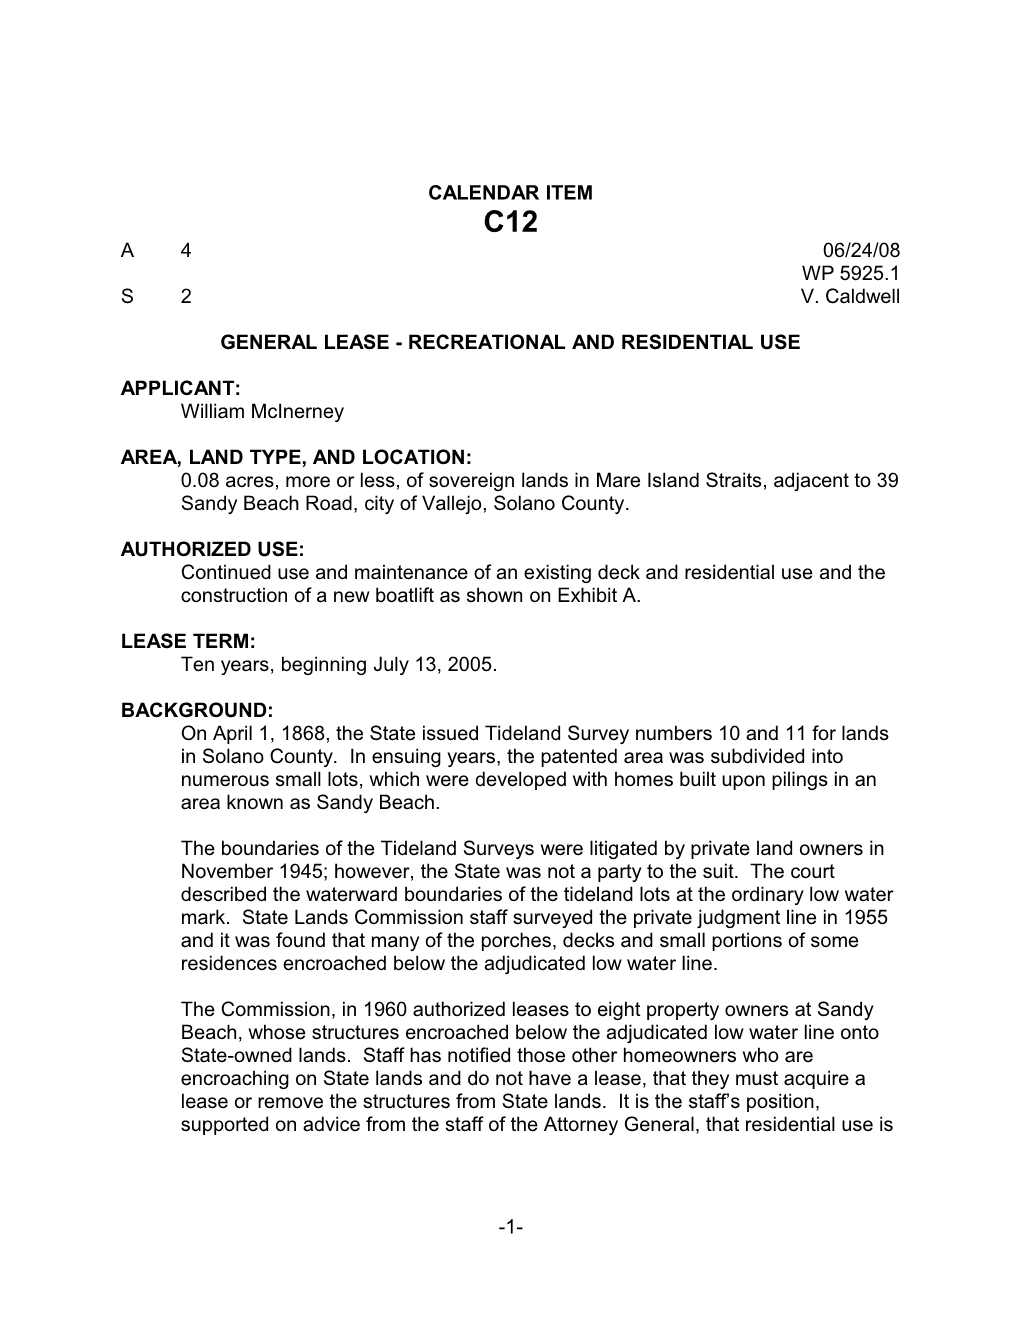 General Lease - Recreational and Residential Use